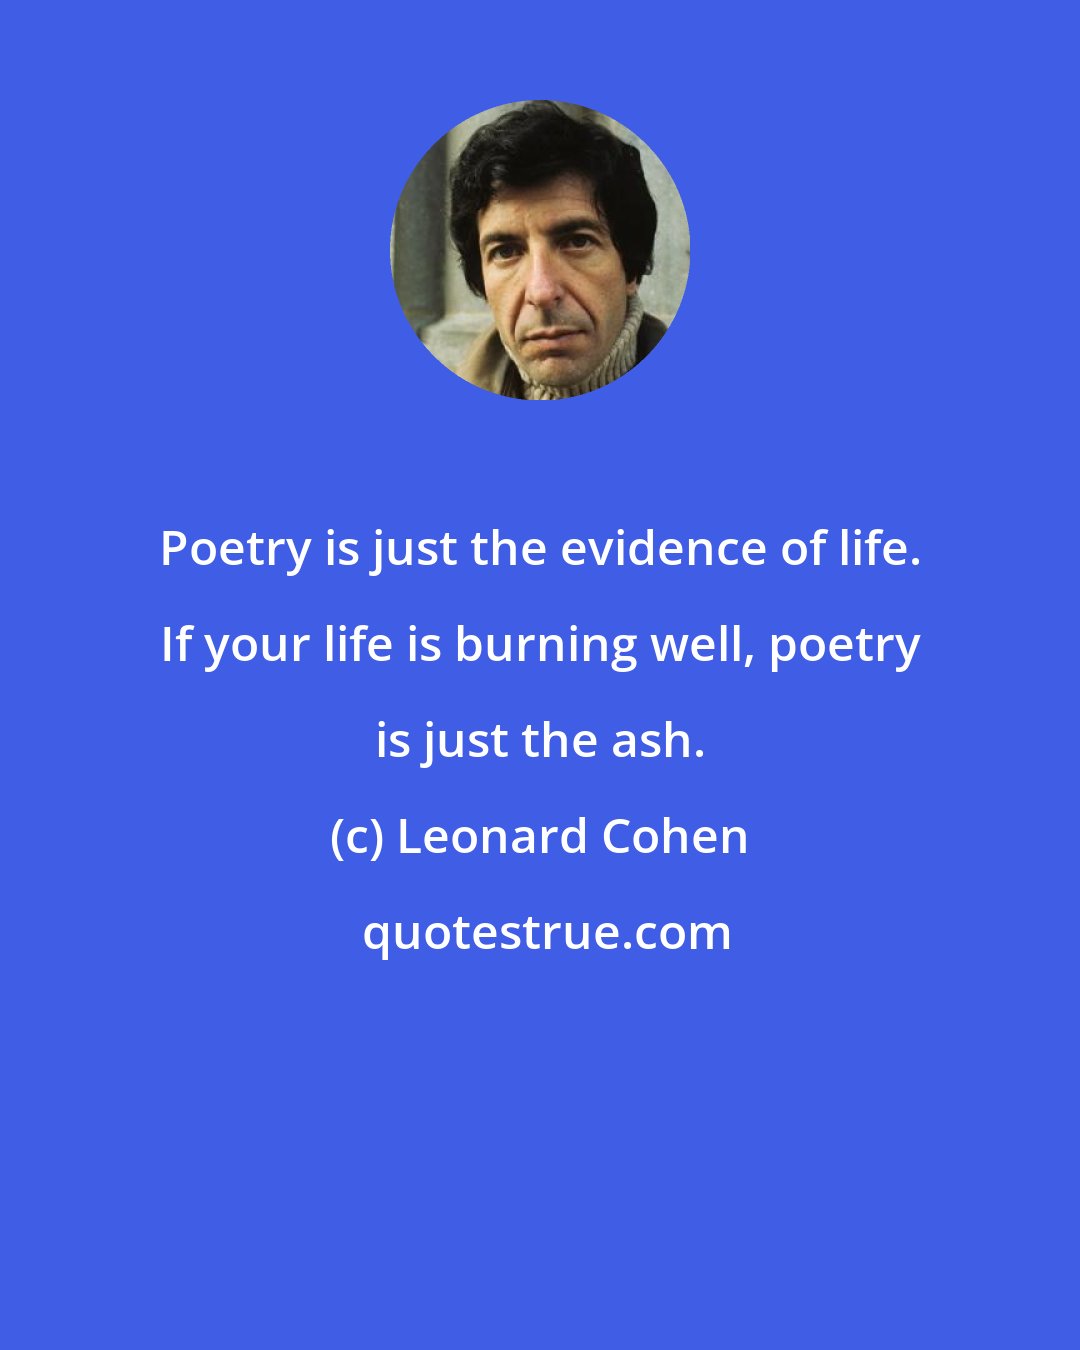 Leonard Cohen: Poetry is just the evidence of life. If your life is burning well, poetry is just the ash.